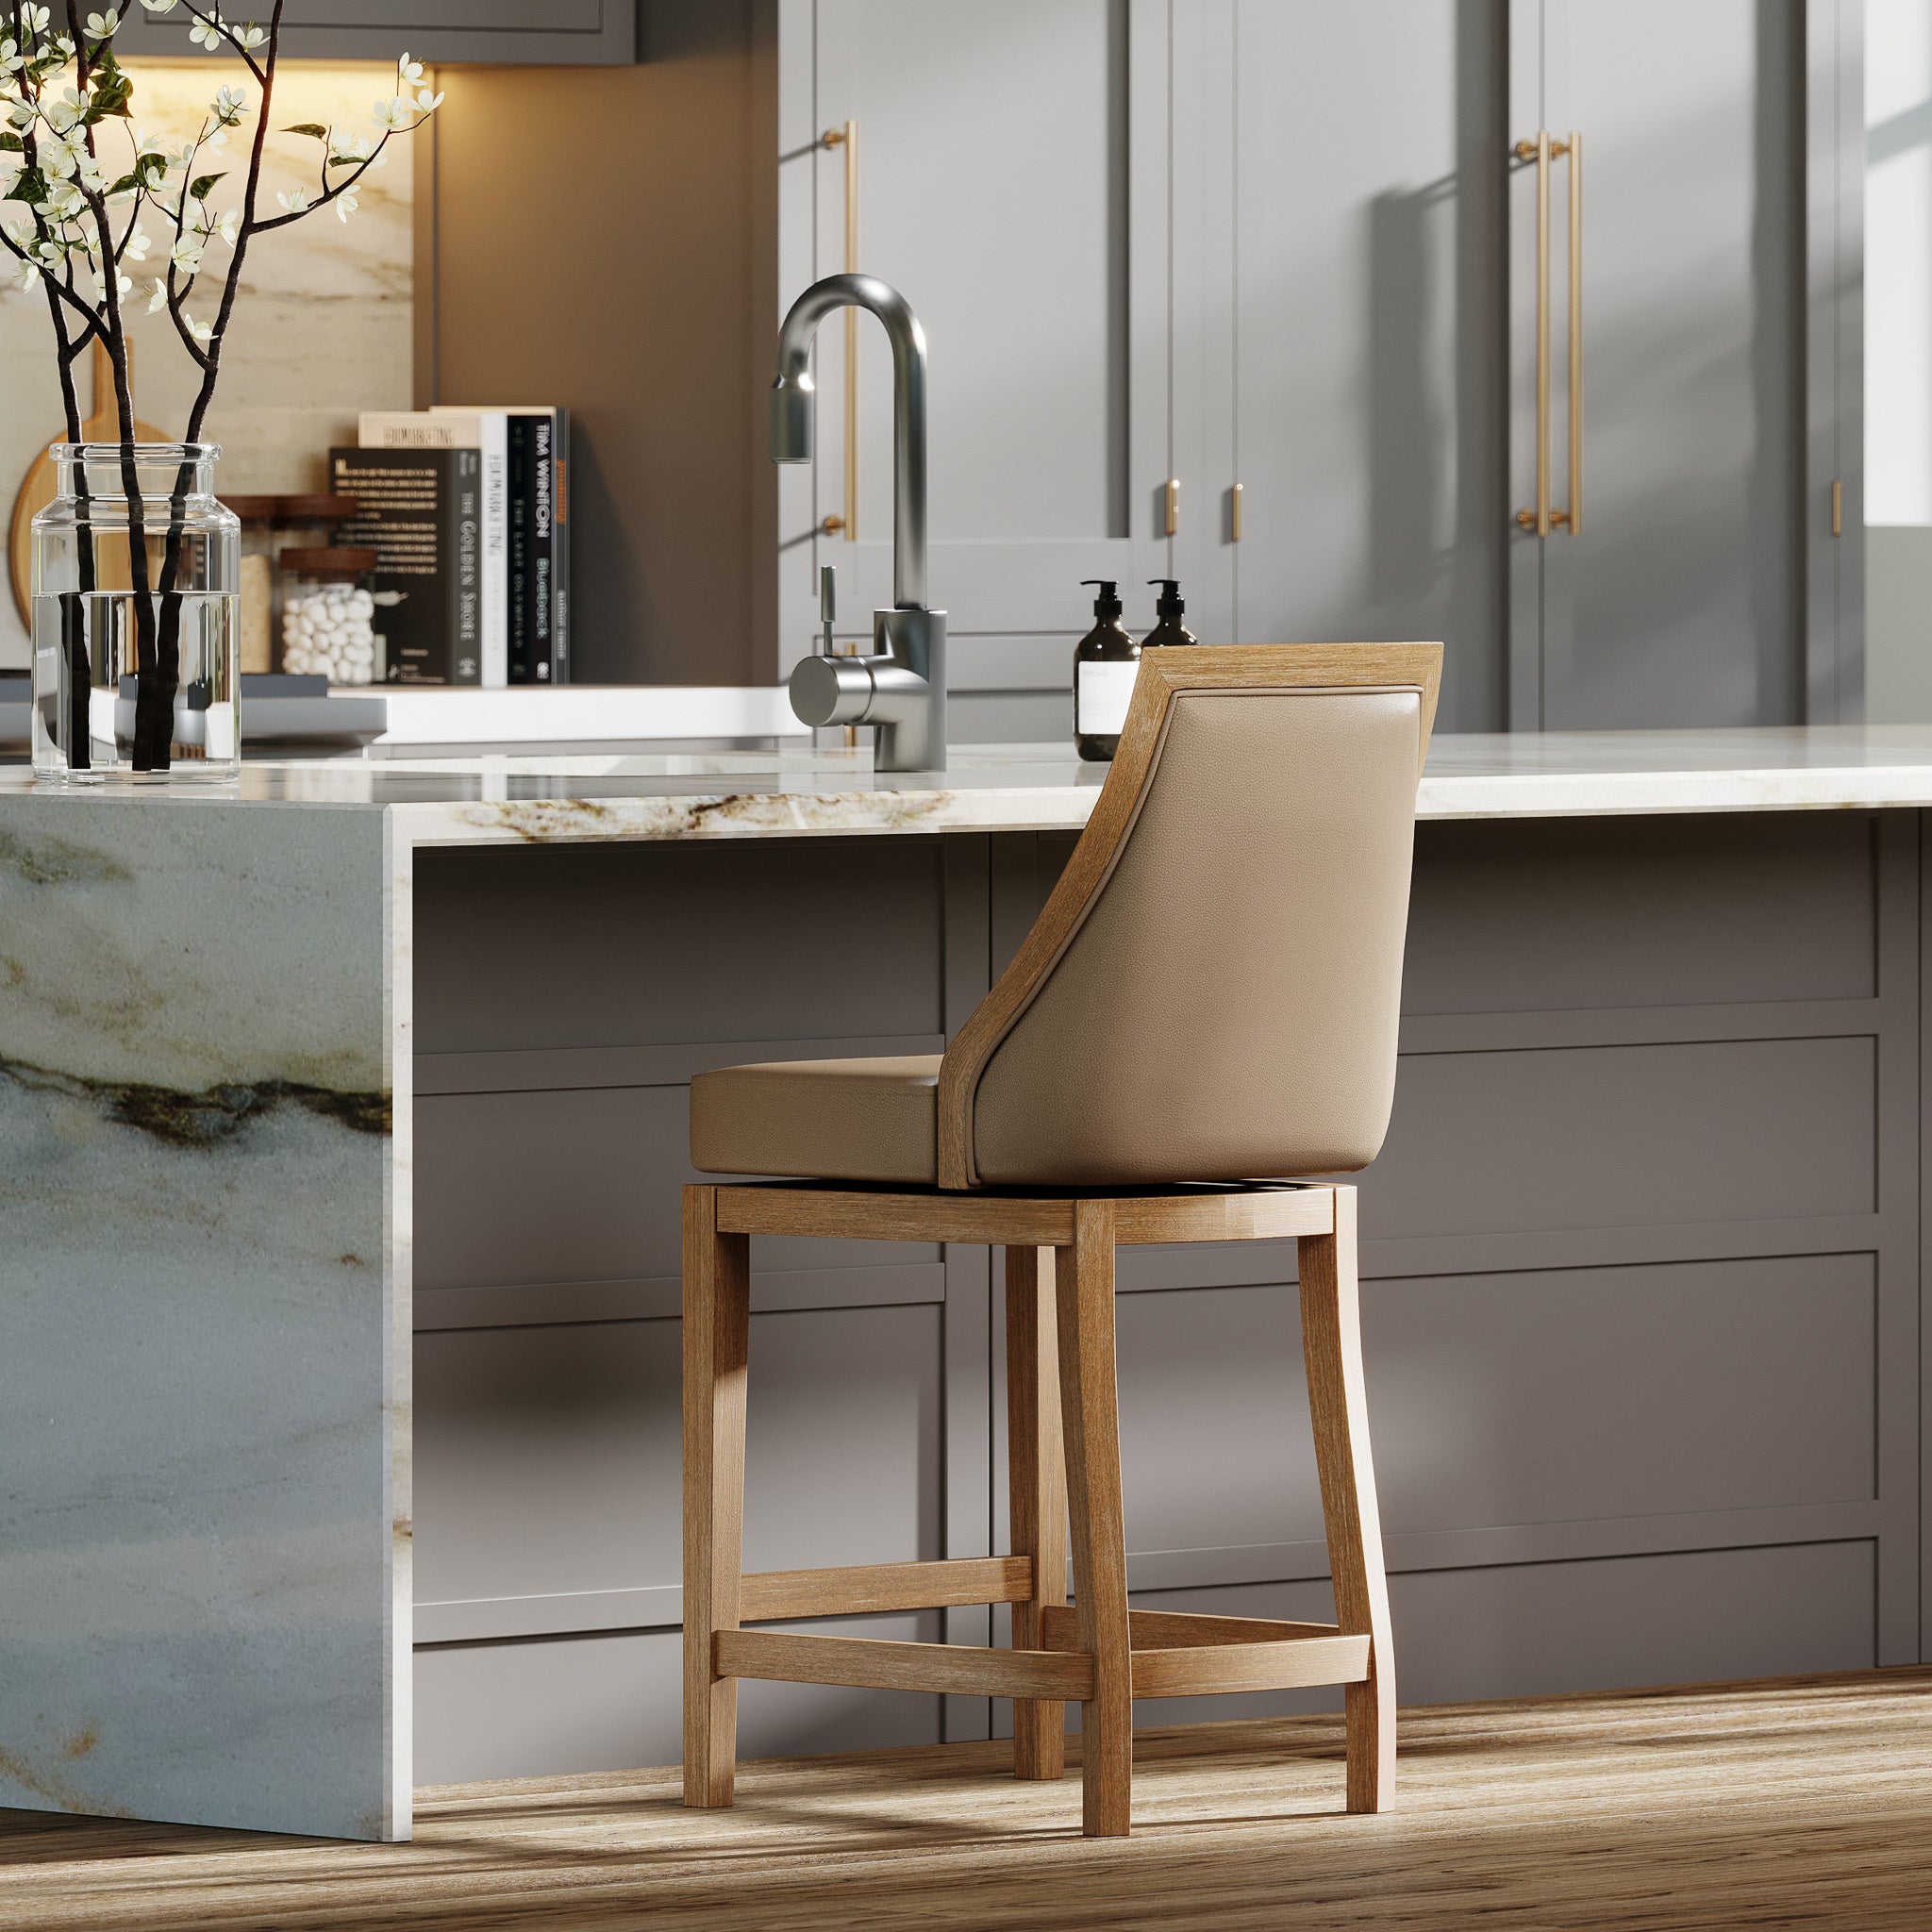 Vienna Counter Stool in Weathered Oak Finish with Avanti Bone Vegan Leather in Stools by Maven Lane